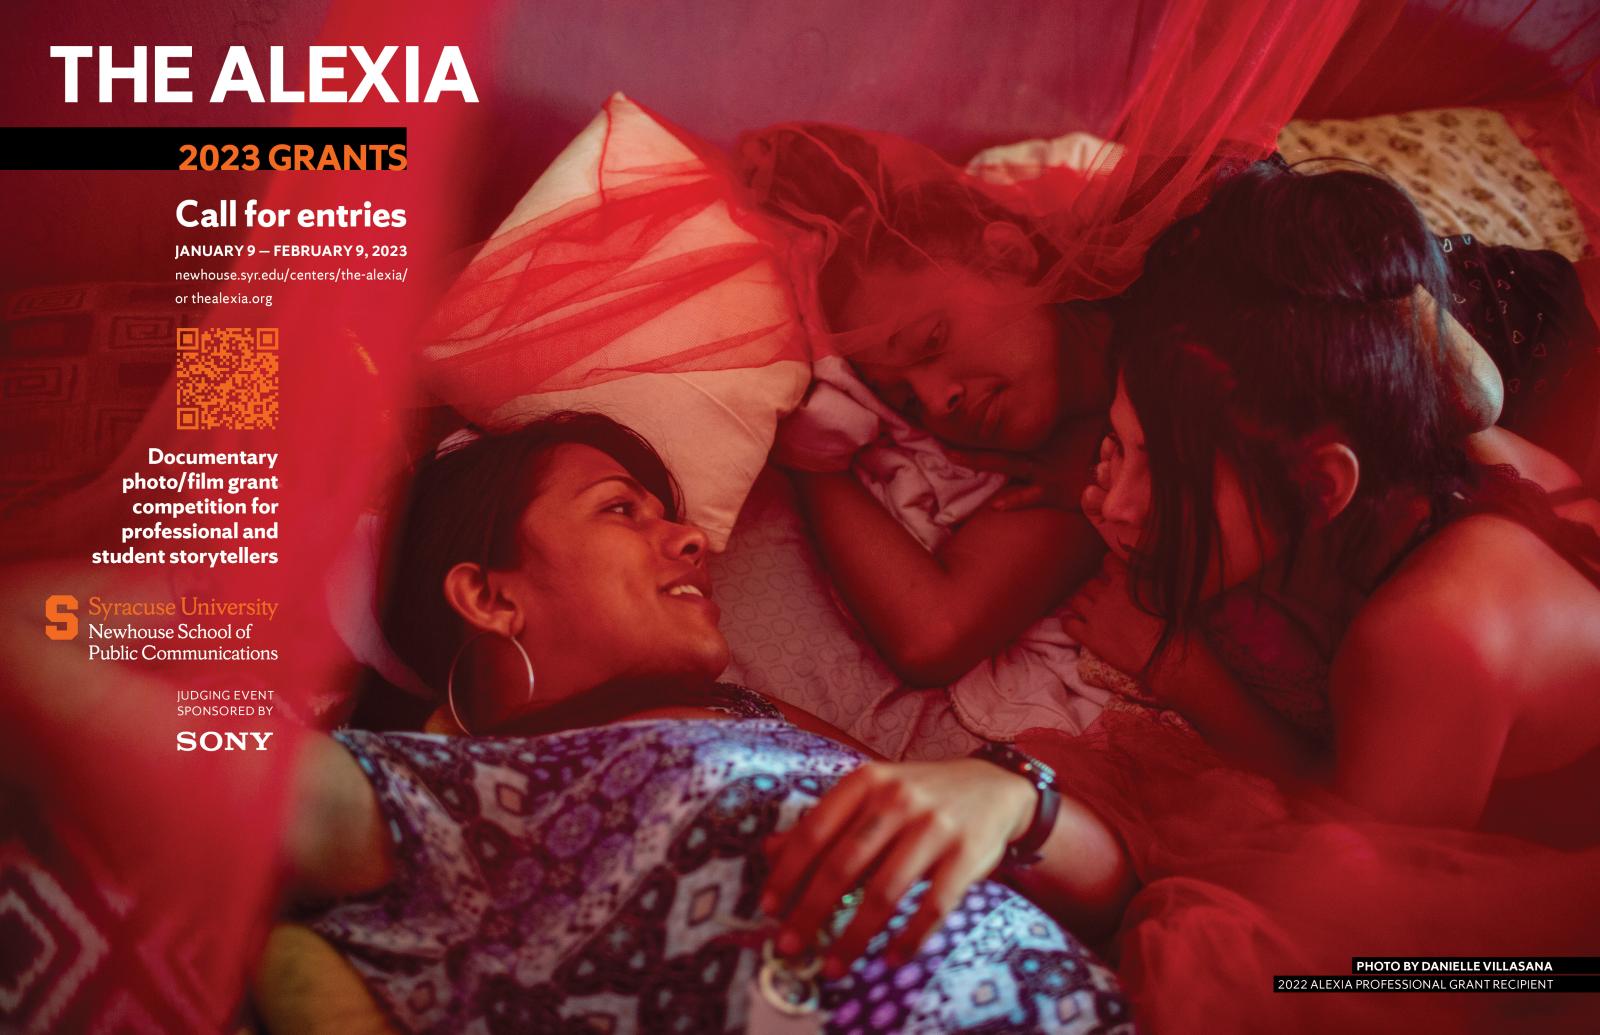 Thumbnail of THE ALEXIA OPENS ITS 2023 CALL FOR ENTRIES